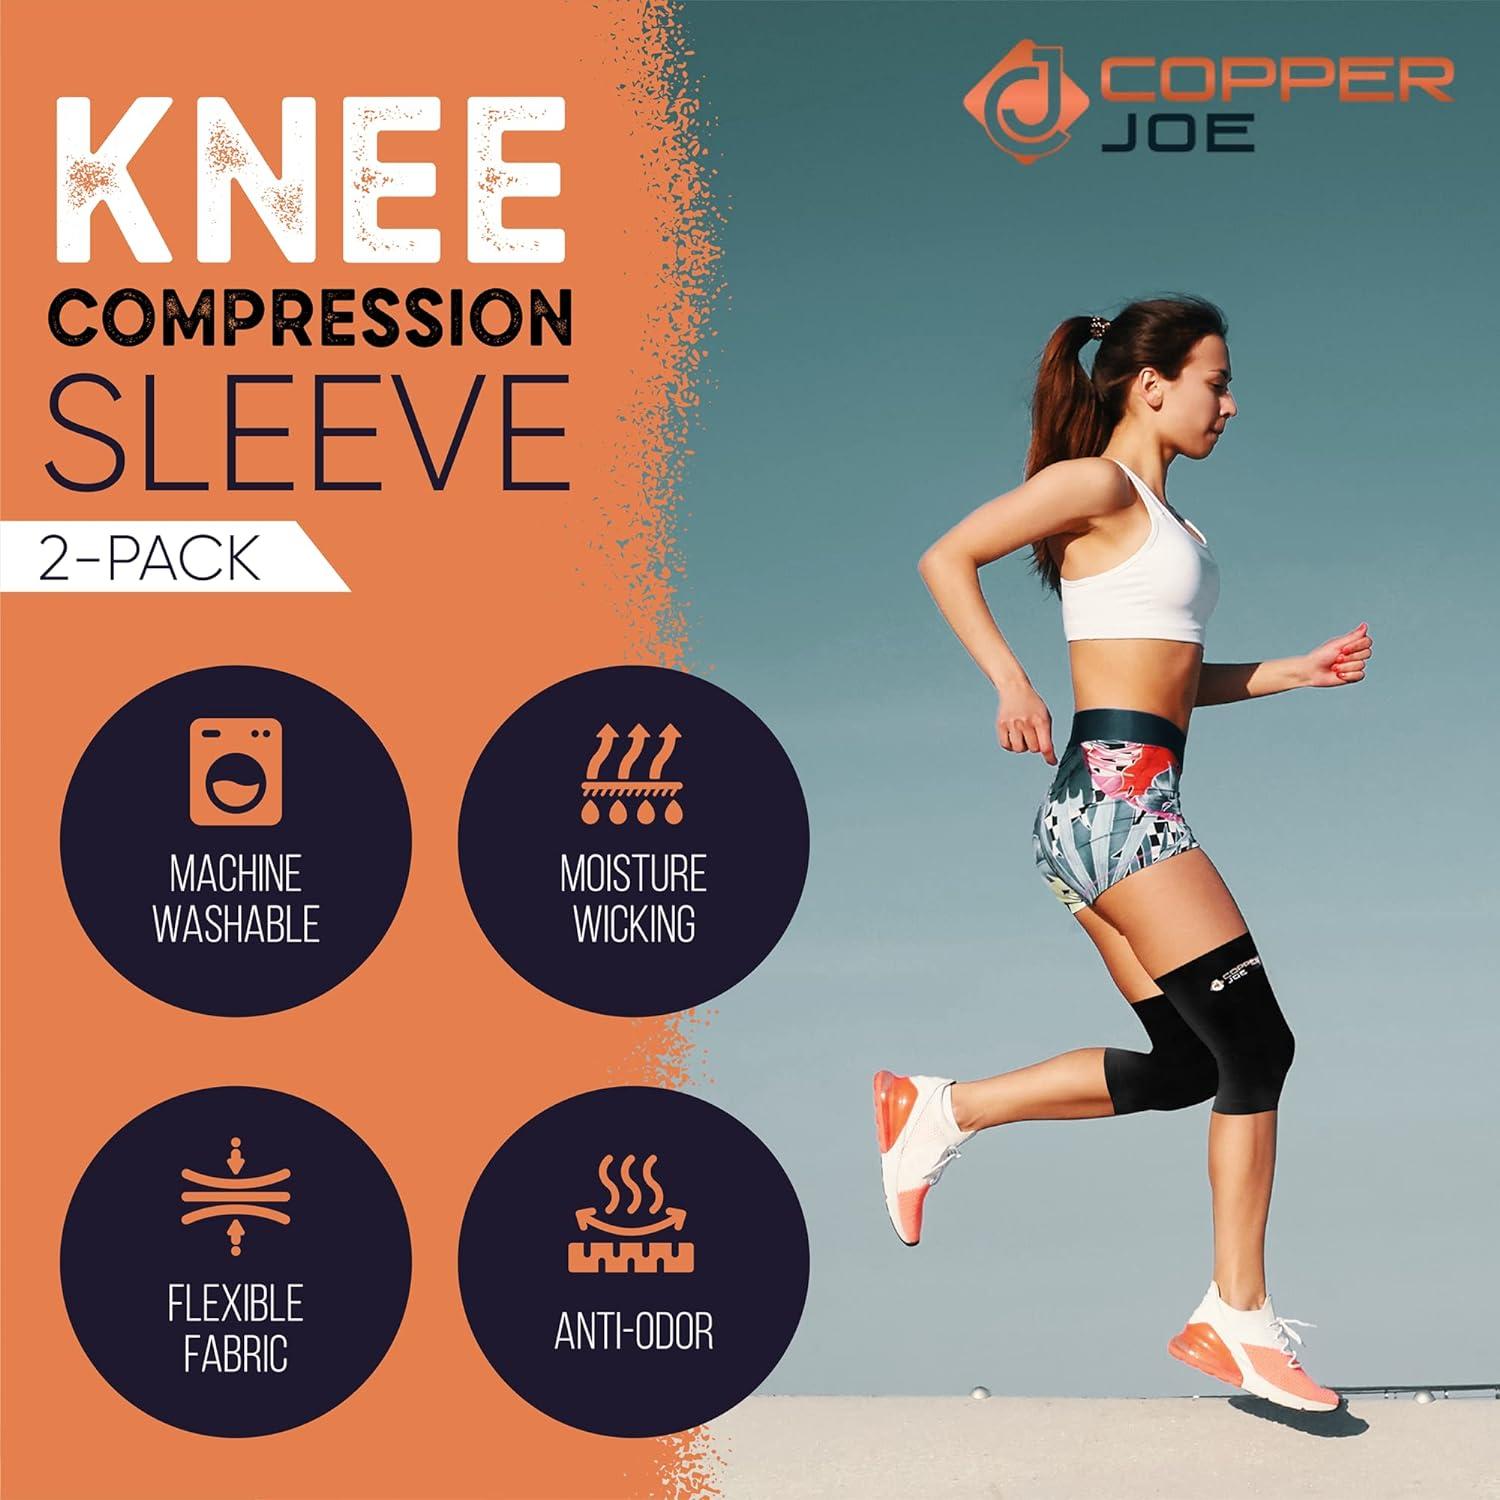 Copper Joe Calf Support Sleeves - Ultimate Copper for Legs Pain